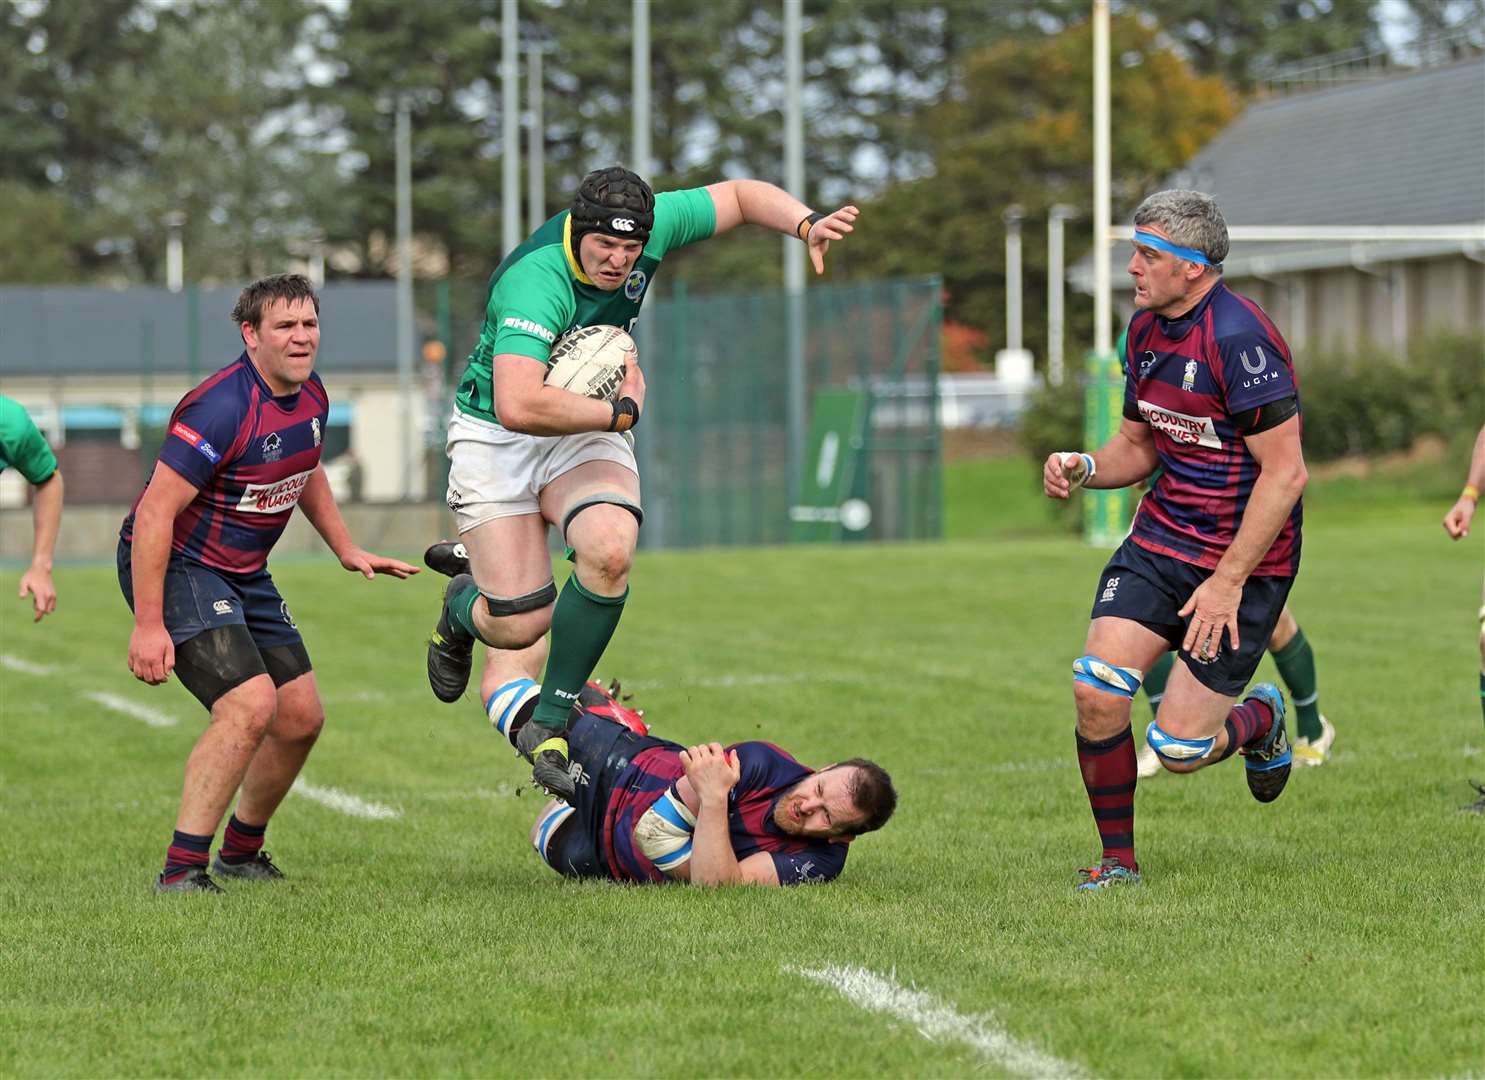 Caithness won 27-12 when Hillfoots visited Millbank last month. Here, Kevin Budge jumps through a tackle as he heads for the try line. Picture: James Gunn